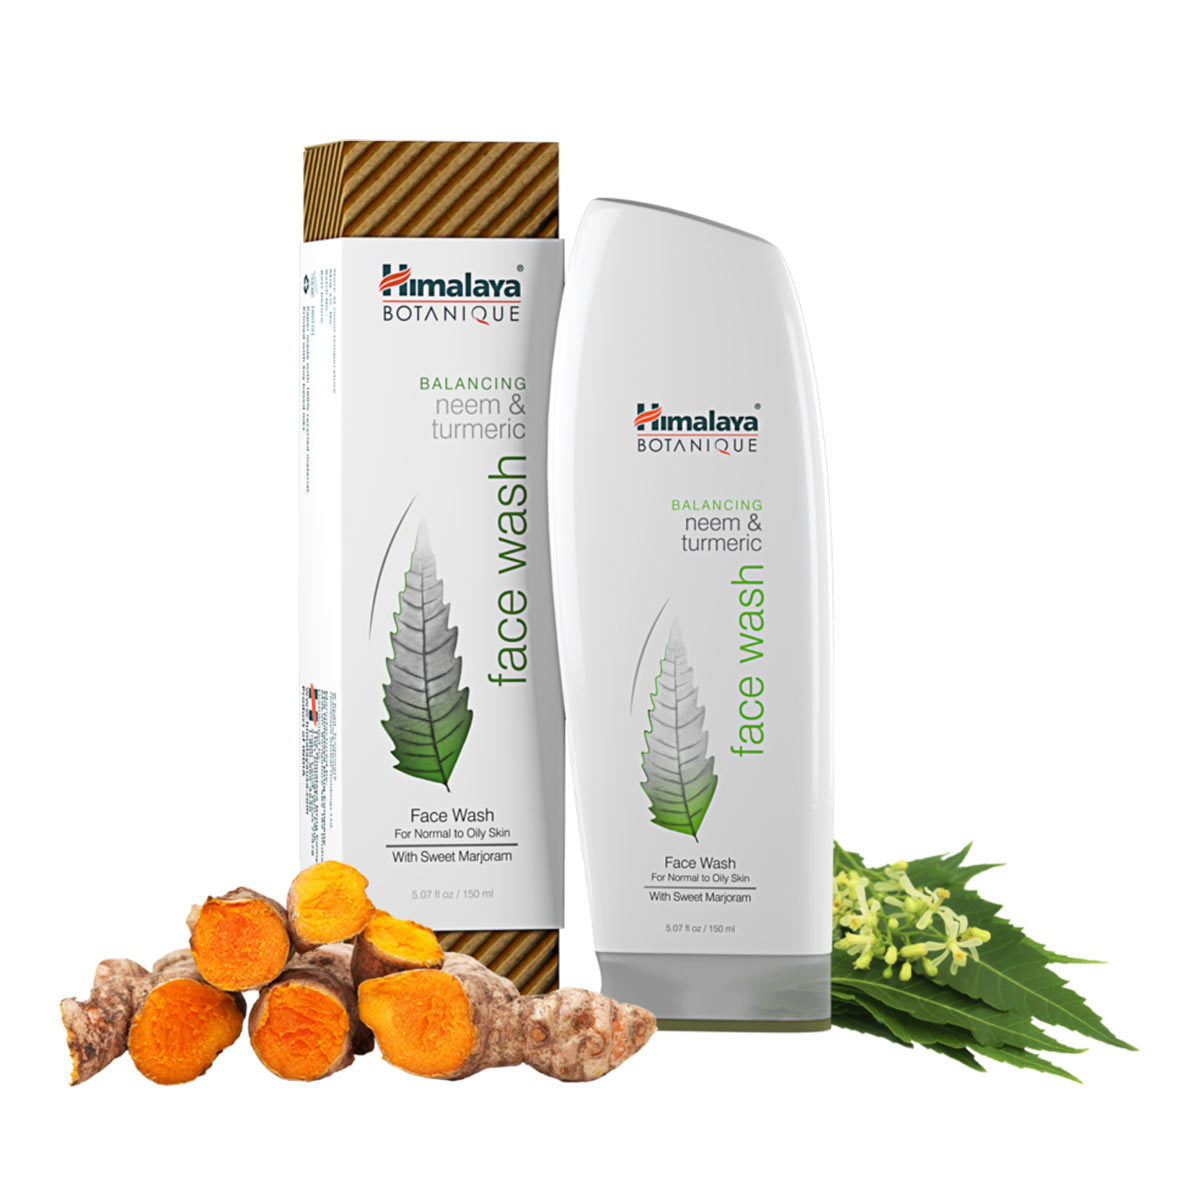 Primary image of Neem & Turmeric Face Wash